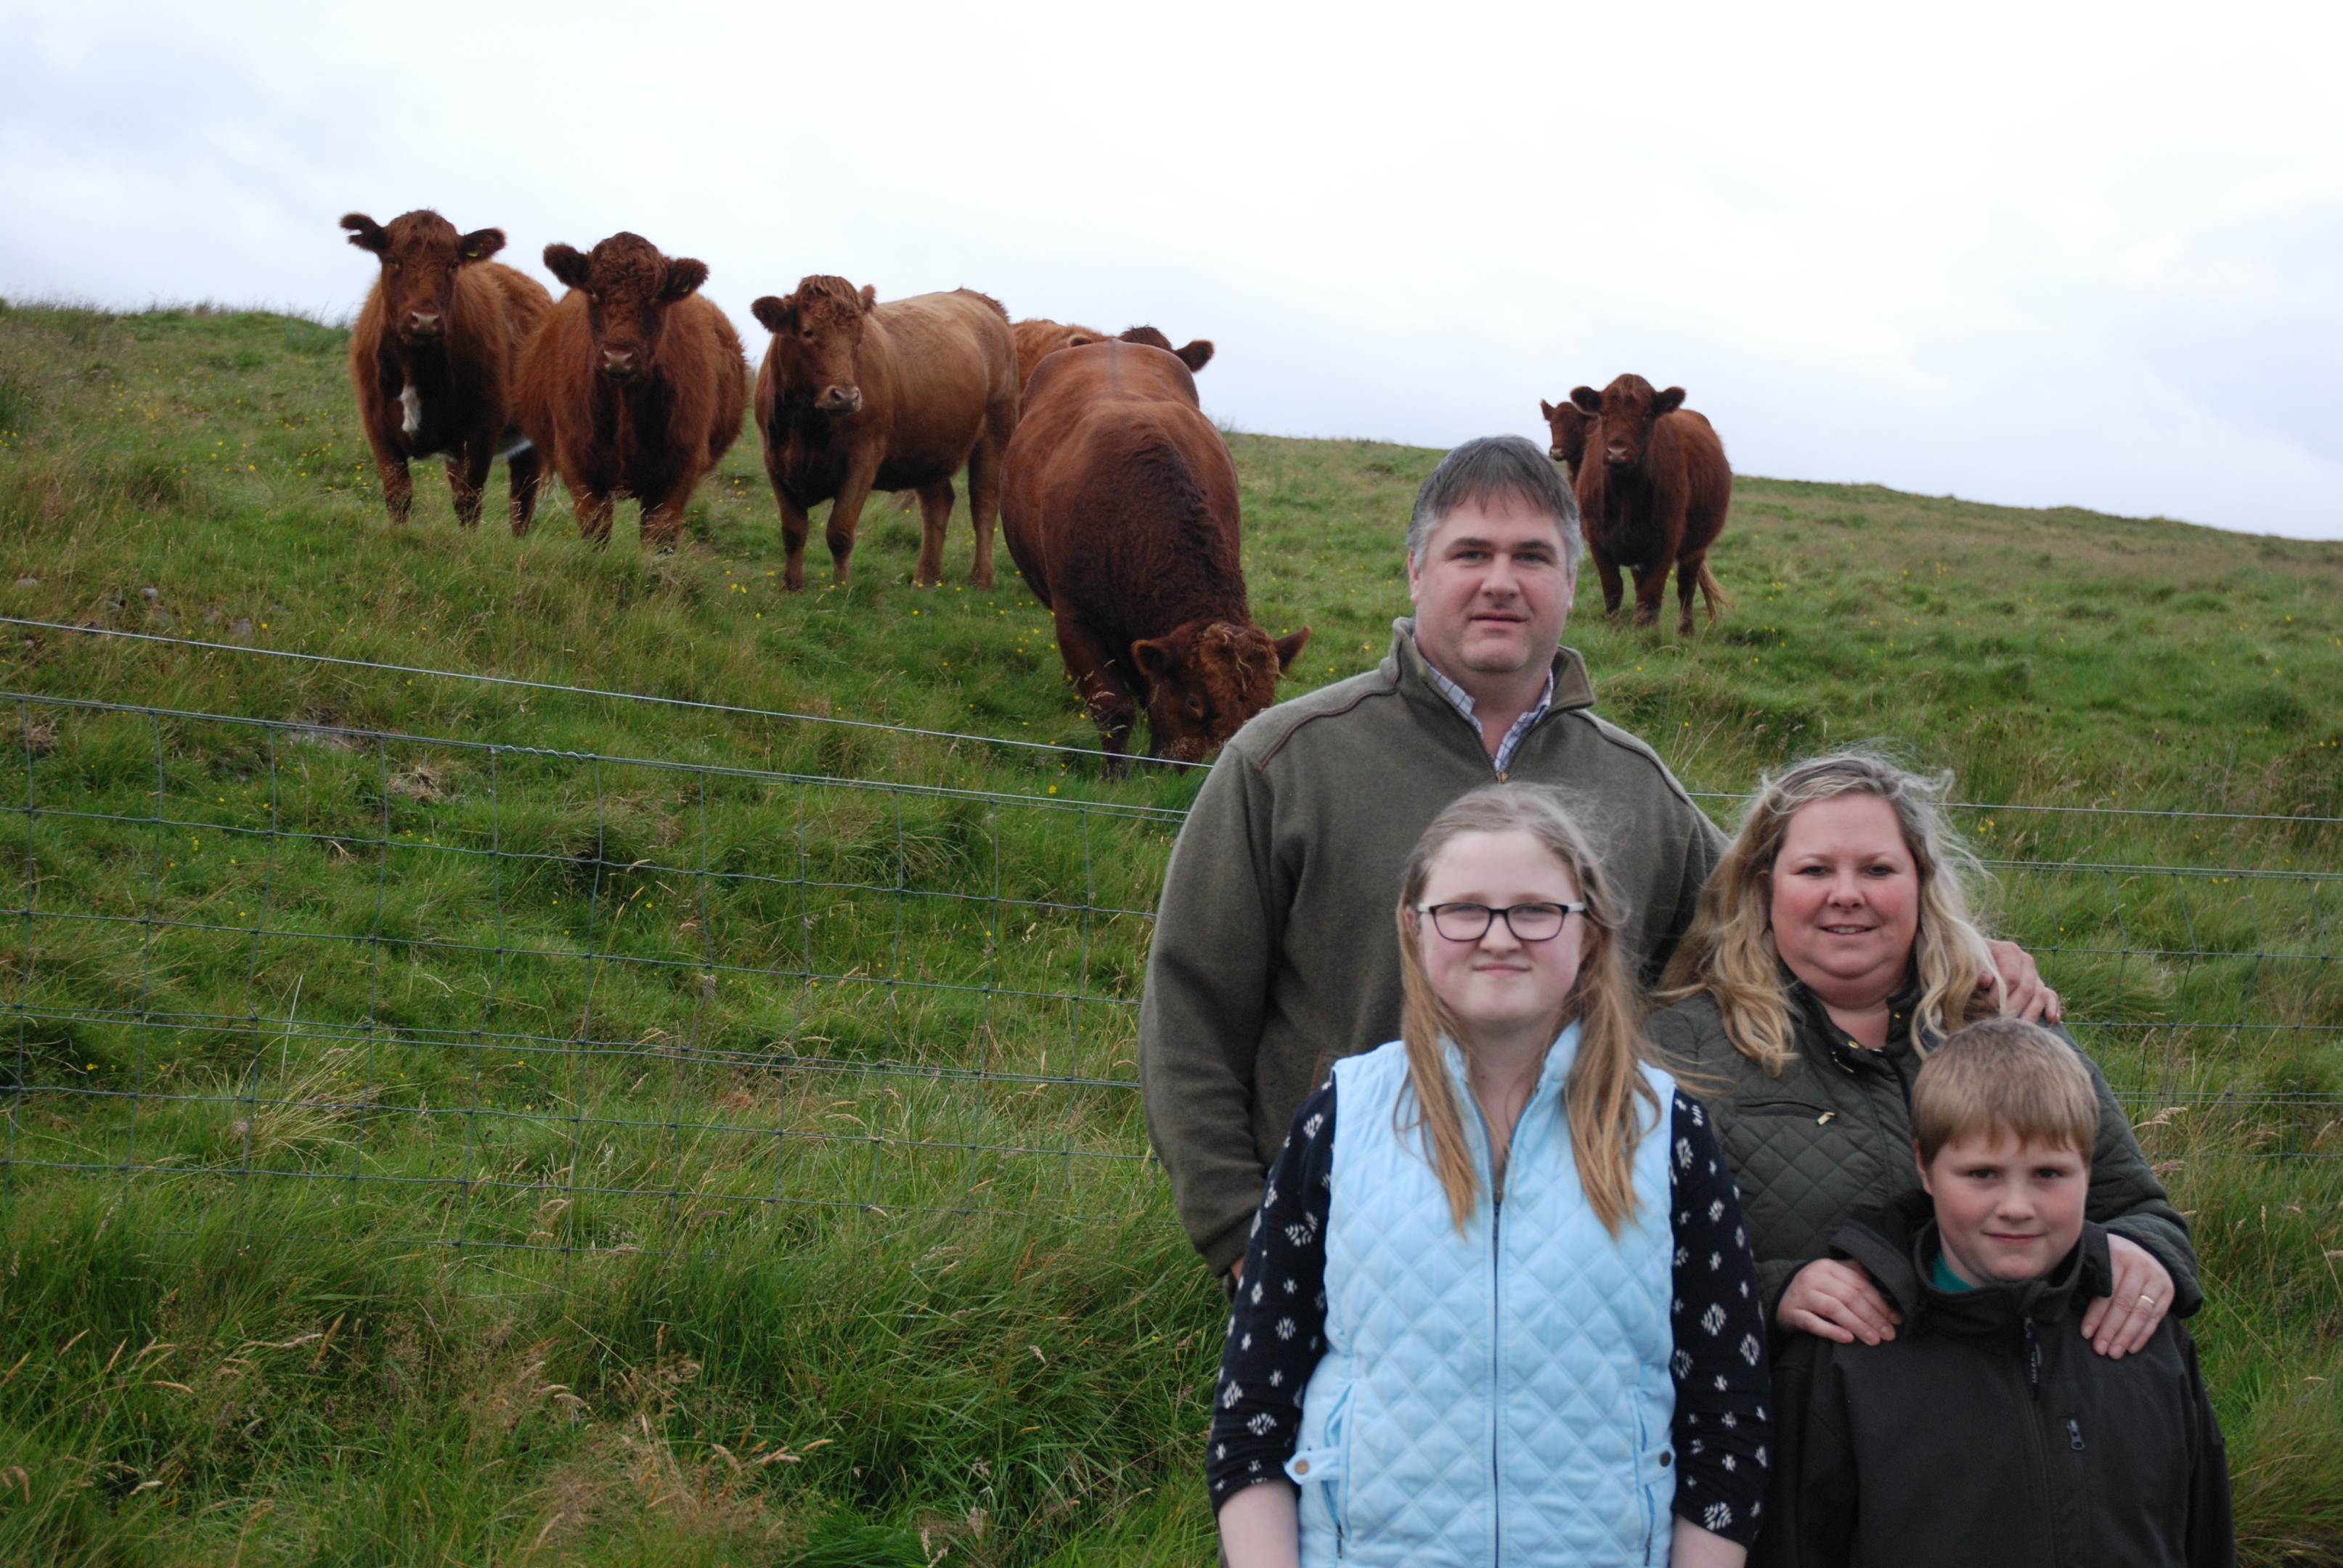 The Bakker family with some of their Luing cattle